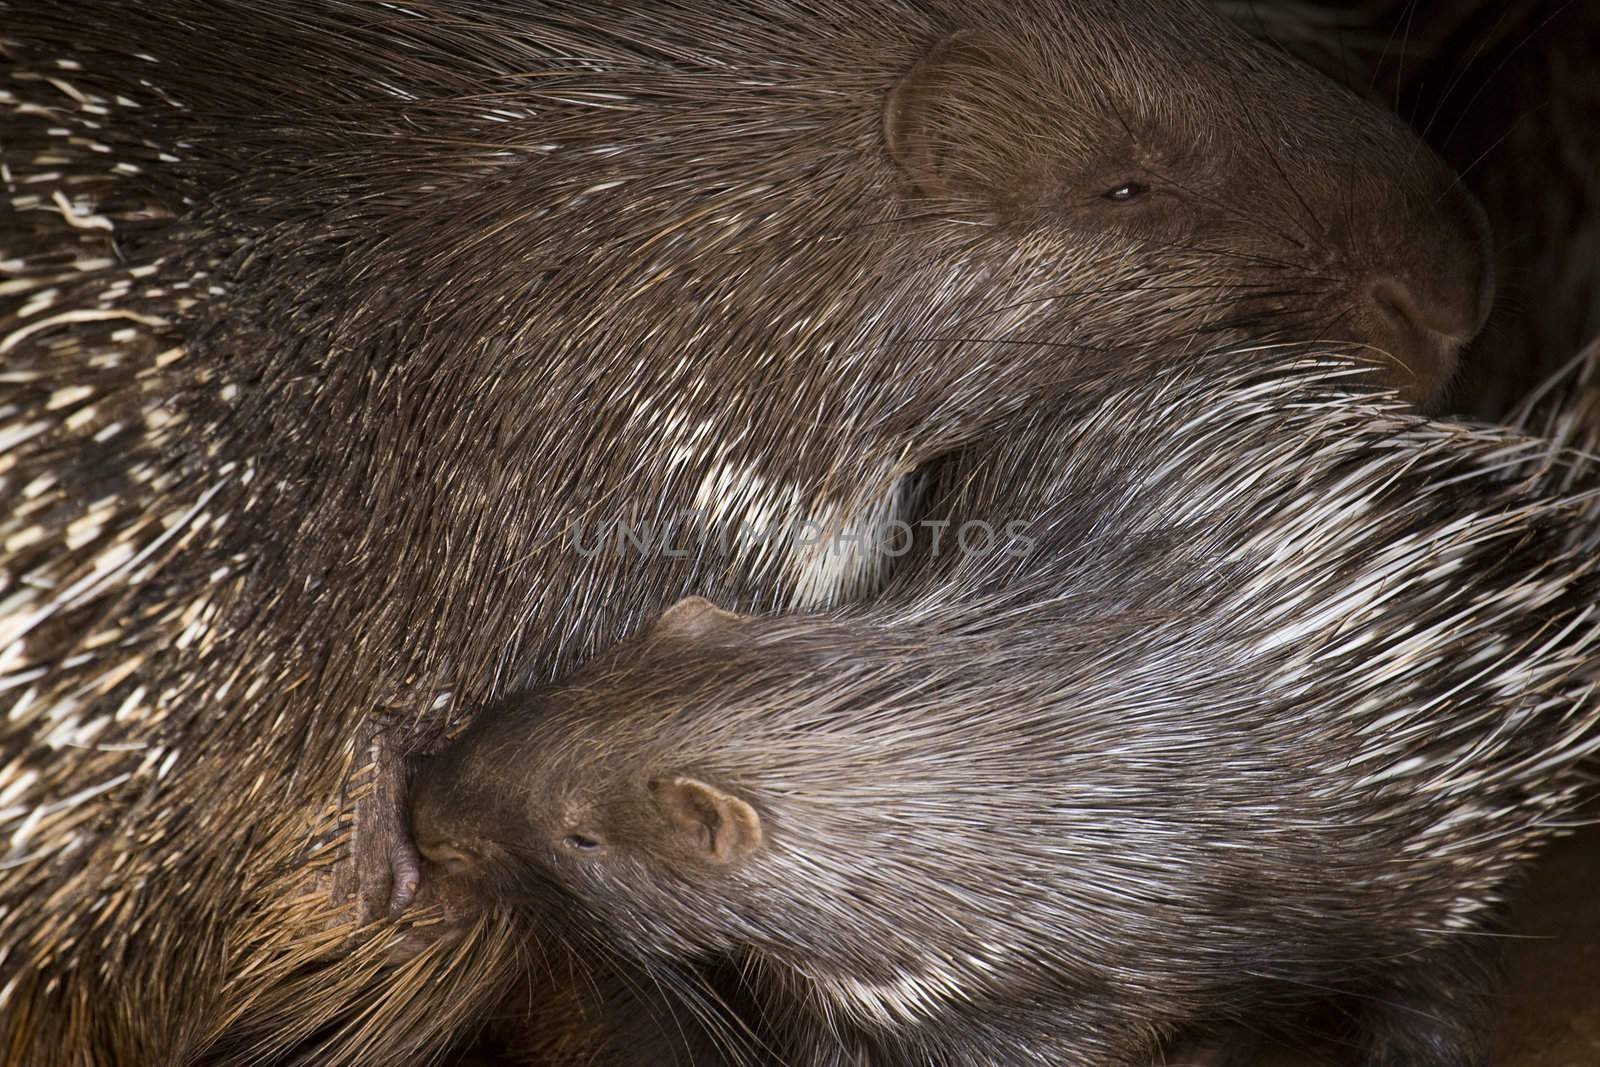 Porcupine Baby and His Mother in Athens Zoo Park